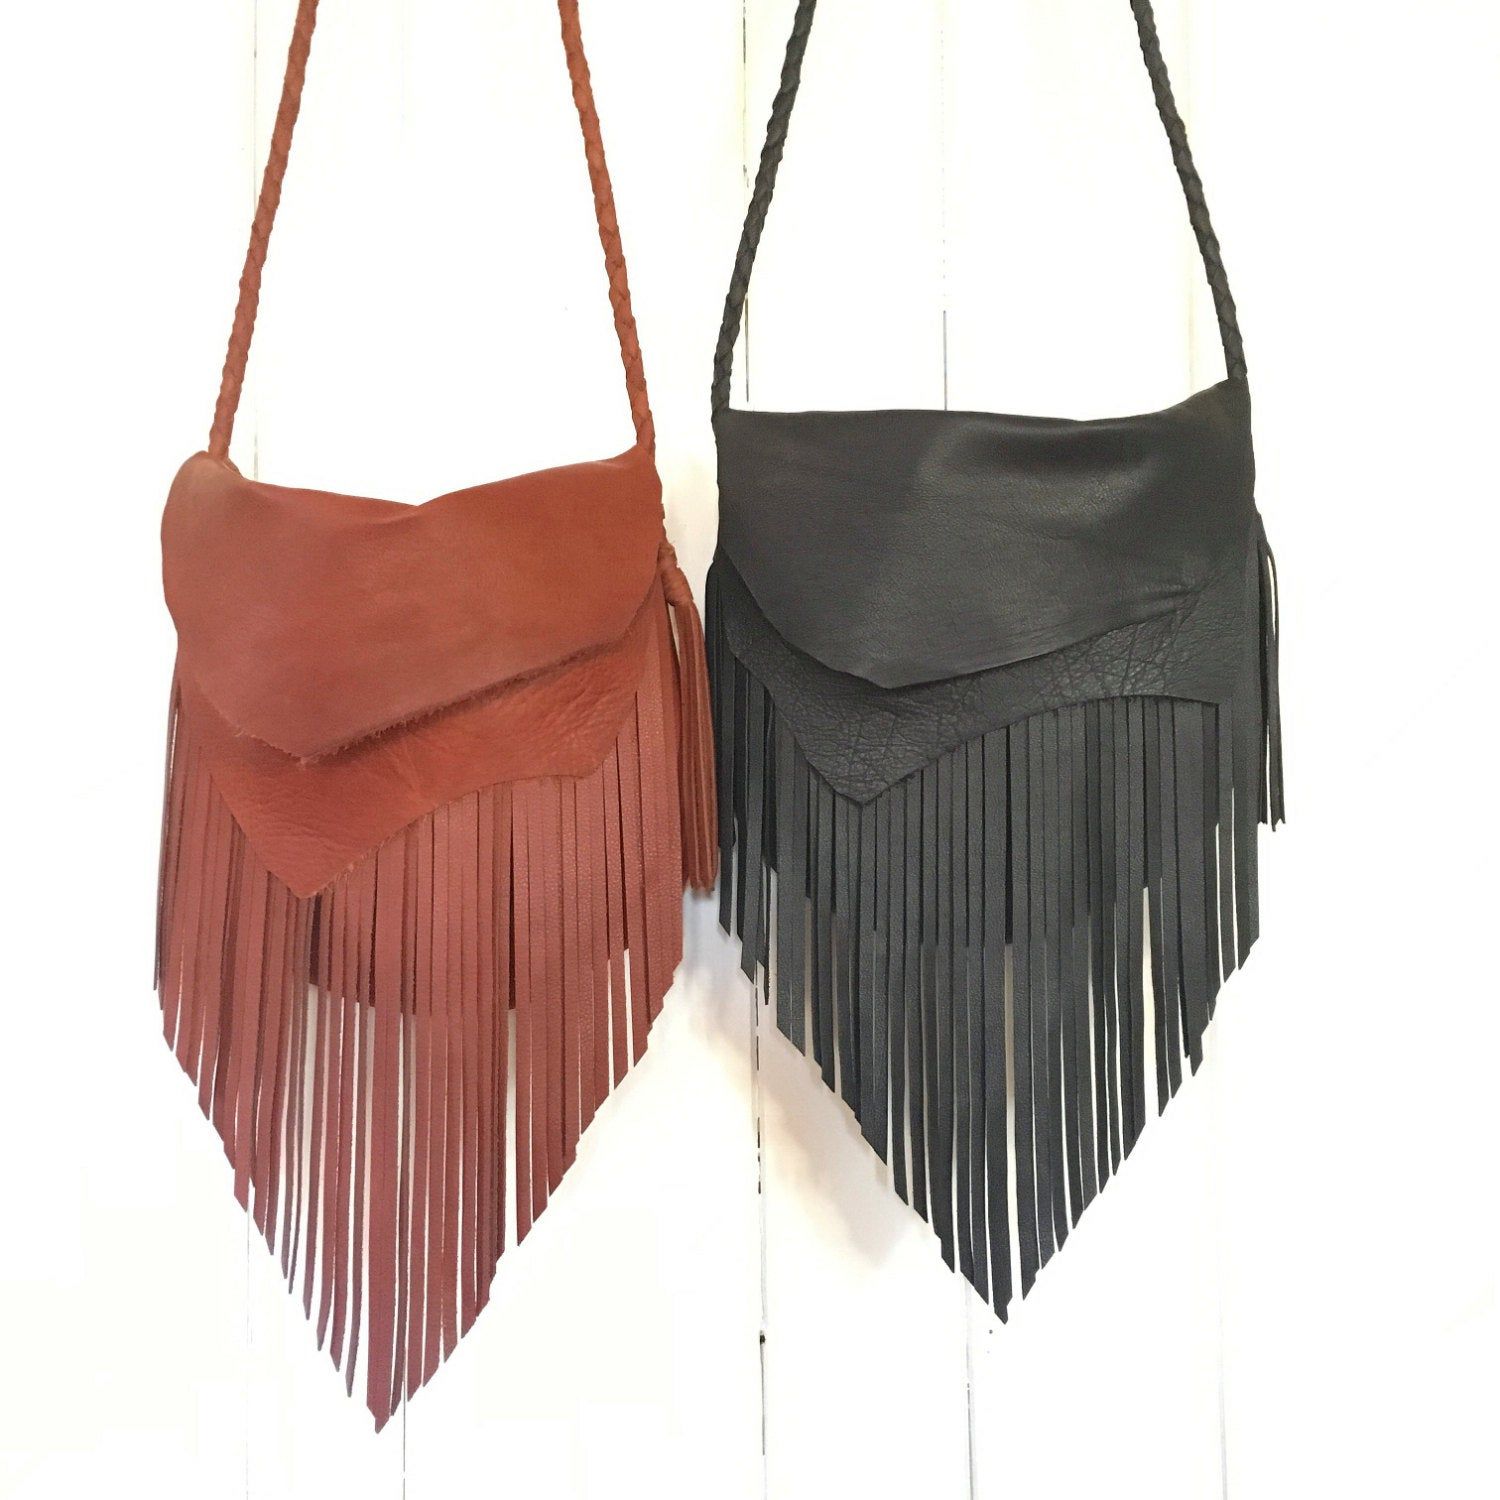 How to Wear Leather Fringe Purse: Top 15 Attractive Outfit Ideas for Women